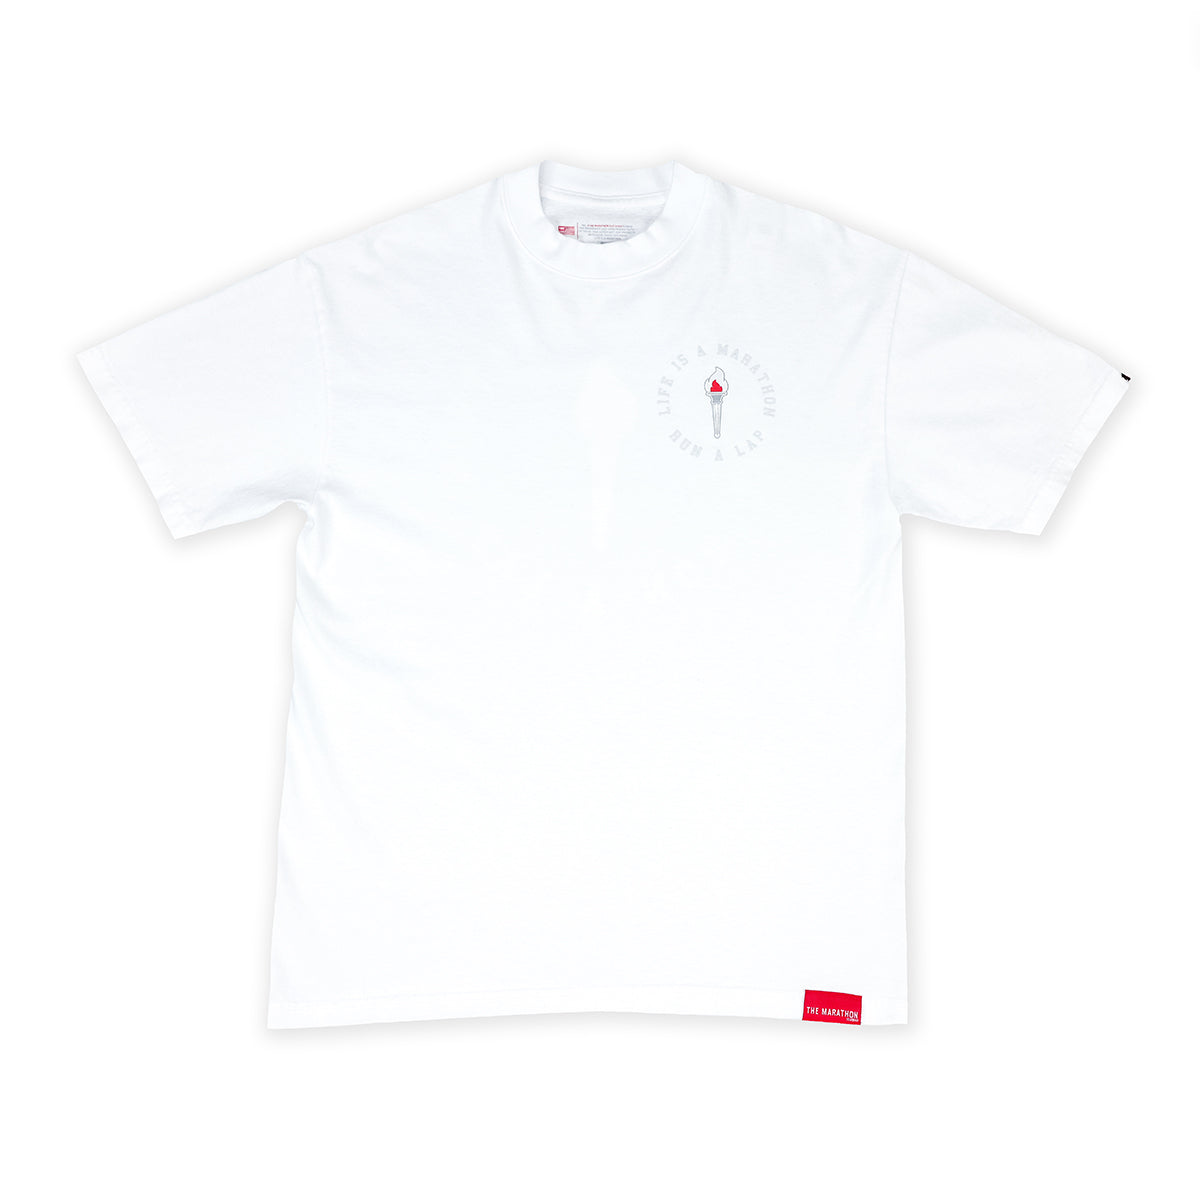 Victory Torch T-Shirt - White - Front